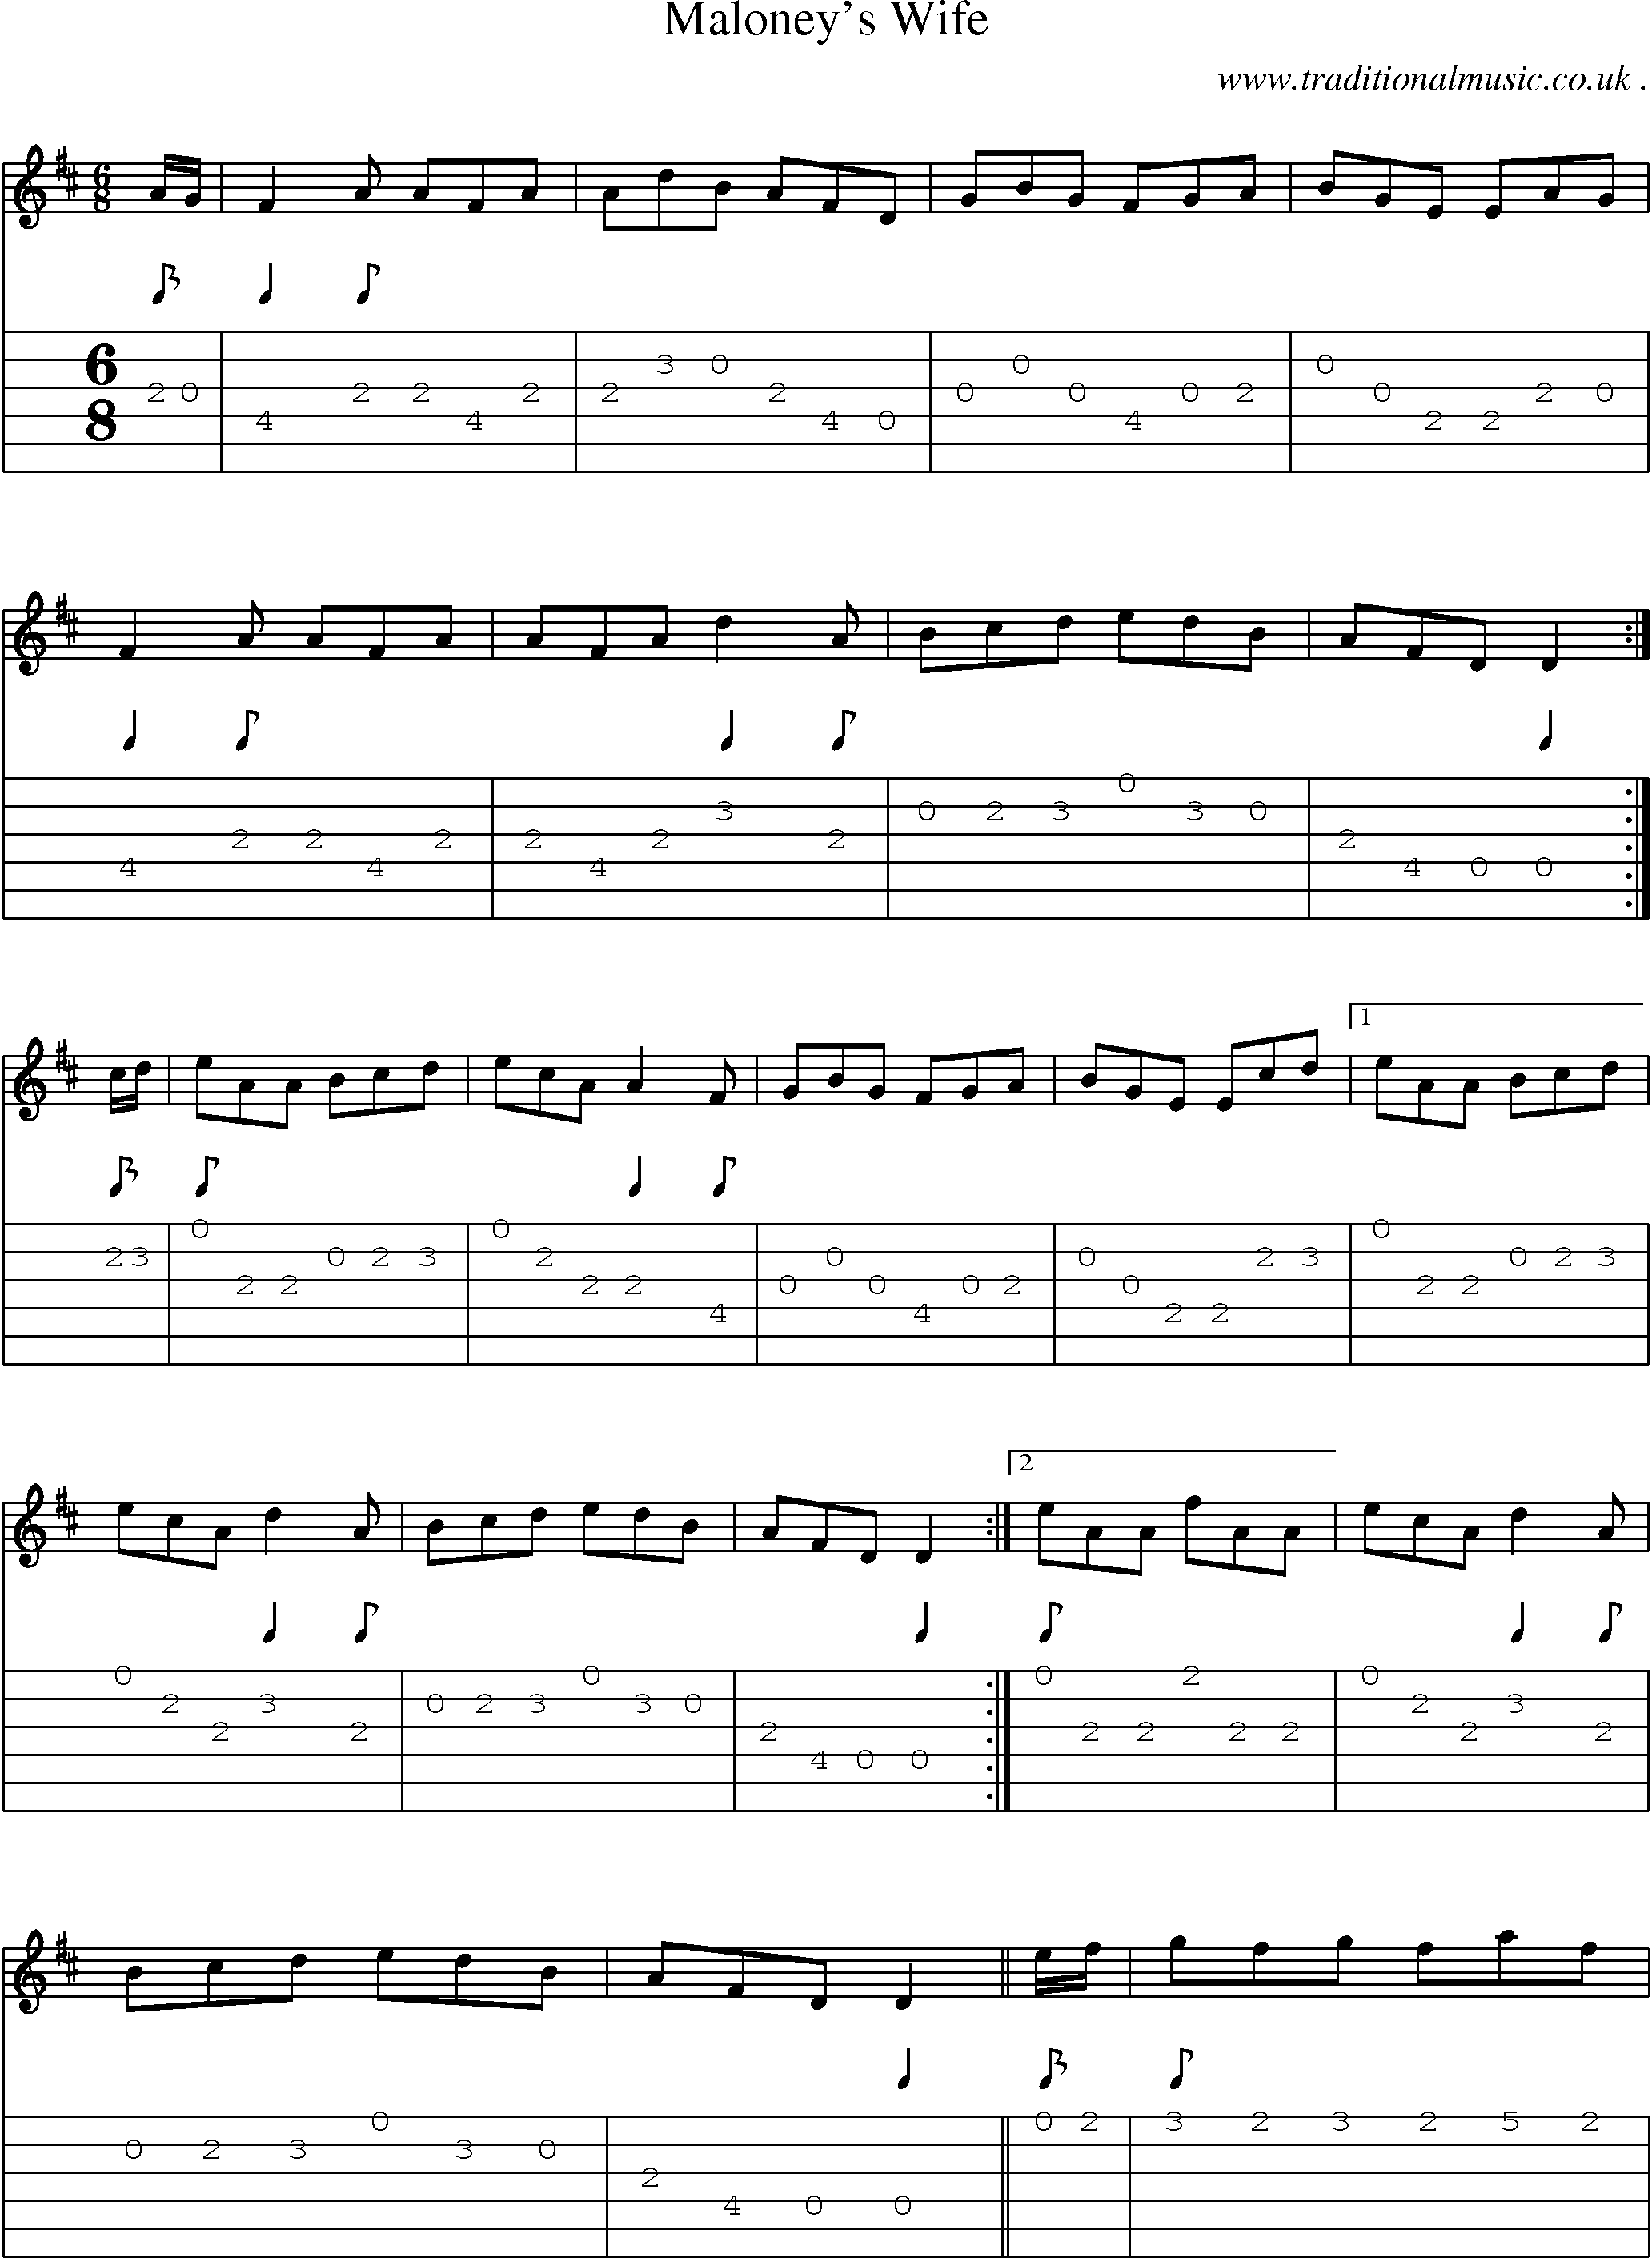 Sheet-Music and Guitar Tabs for Maloneys Wife